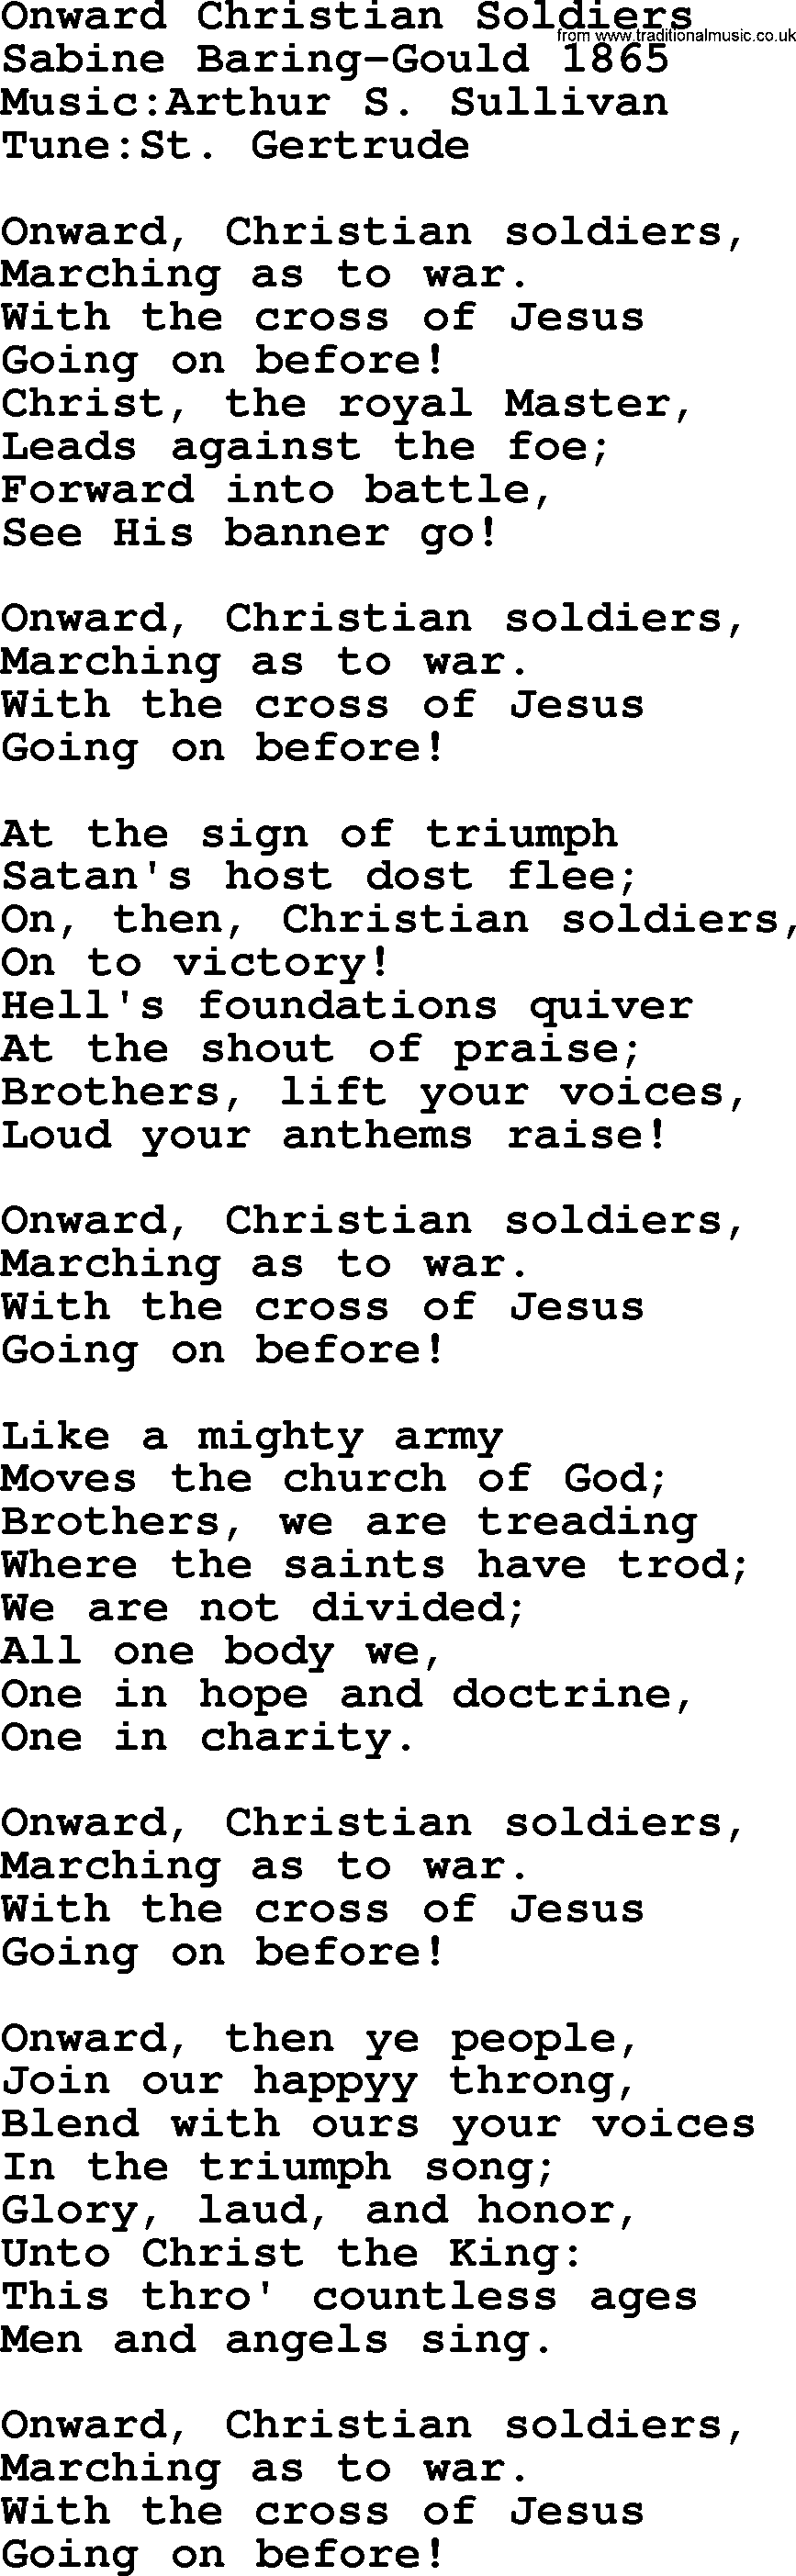 A collection of 500+ most sung Christian church hymns and songs, title: Onward Christian Soldiers, lyrics, PPTX and PDF